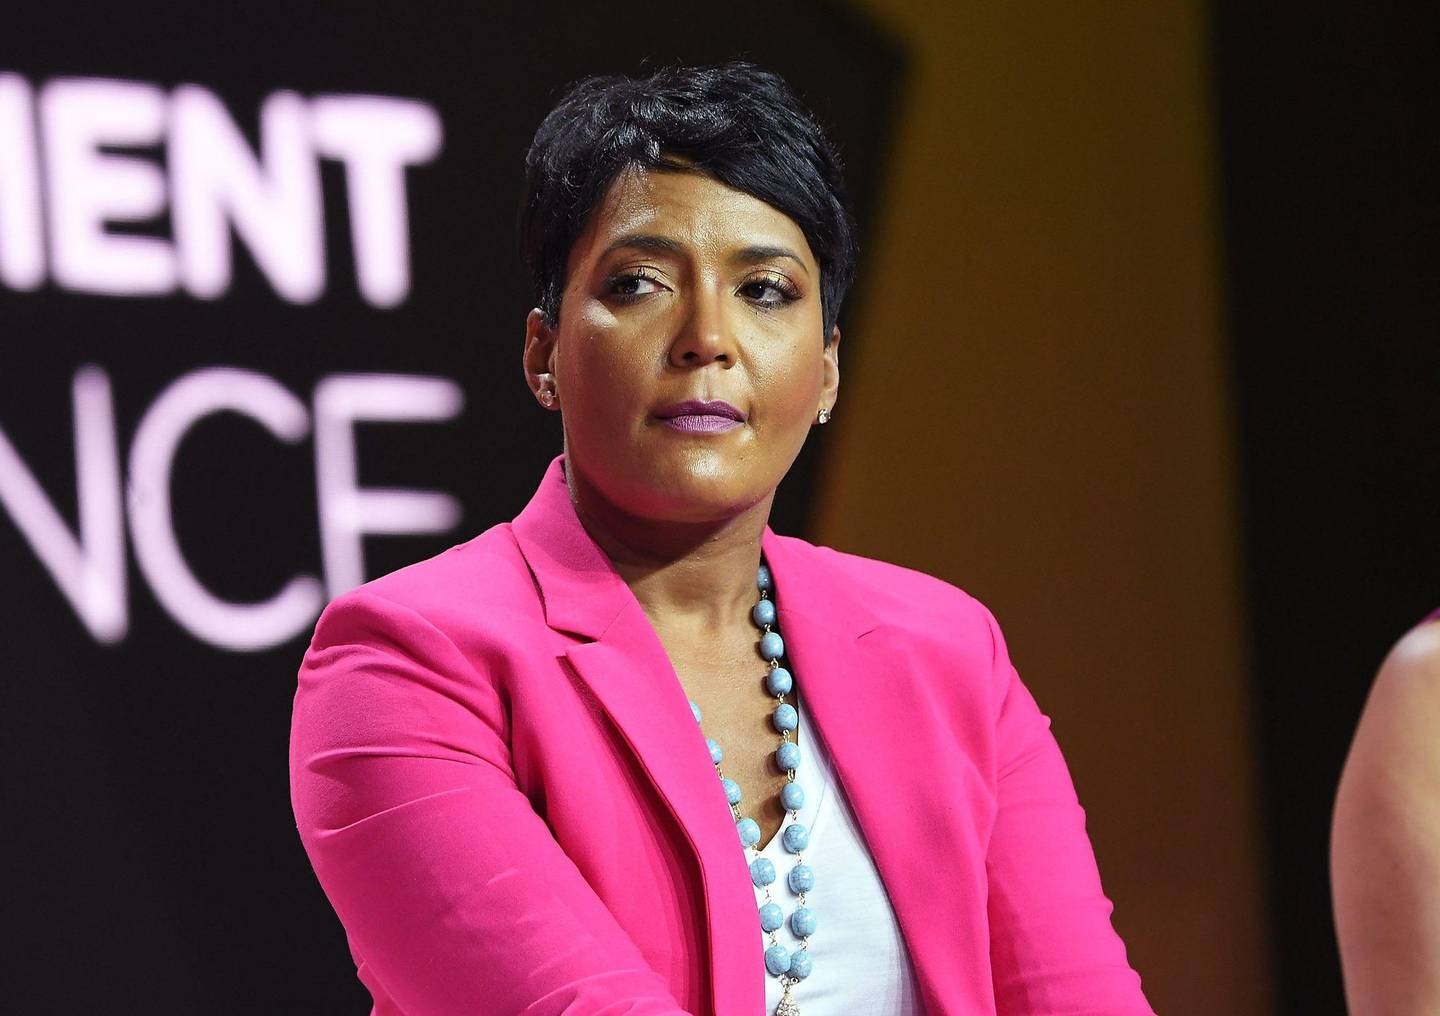 (FILES) In this file photo taken on July 06, 2018 Mayor of Atlanta Keisha Lance Bottoms speaks onstage during the 2018 Essence Festival presented by Coca-Cola at Ernest N. Morial Convention Center in New Orleans, Louisiana. - Mayor of Atlanta Keisha Lance Bottoms announced June 6 in a Teweet she tested positive for coronavirus: �COVID-19 has literally hit home. I have had NO symptoms and have tested positive.� (Photo by Paras Griffin / GETTY IMAGES NORTH AMERICA / AFP)